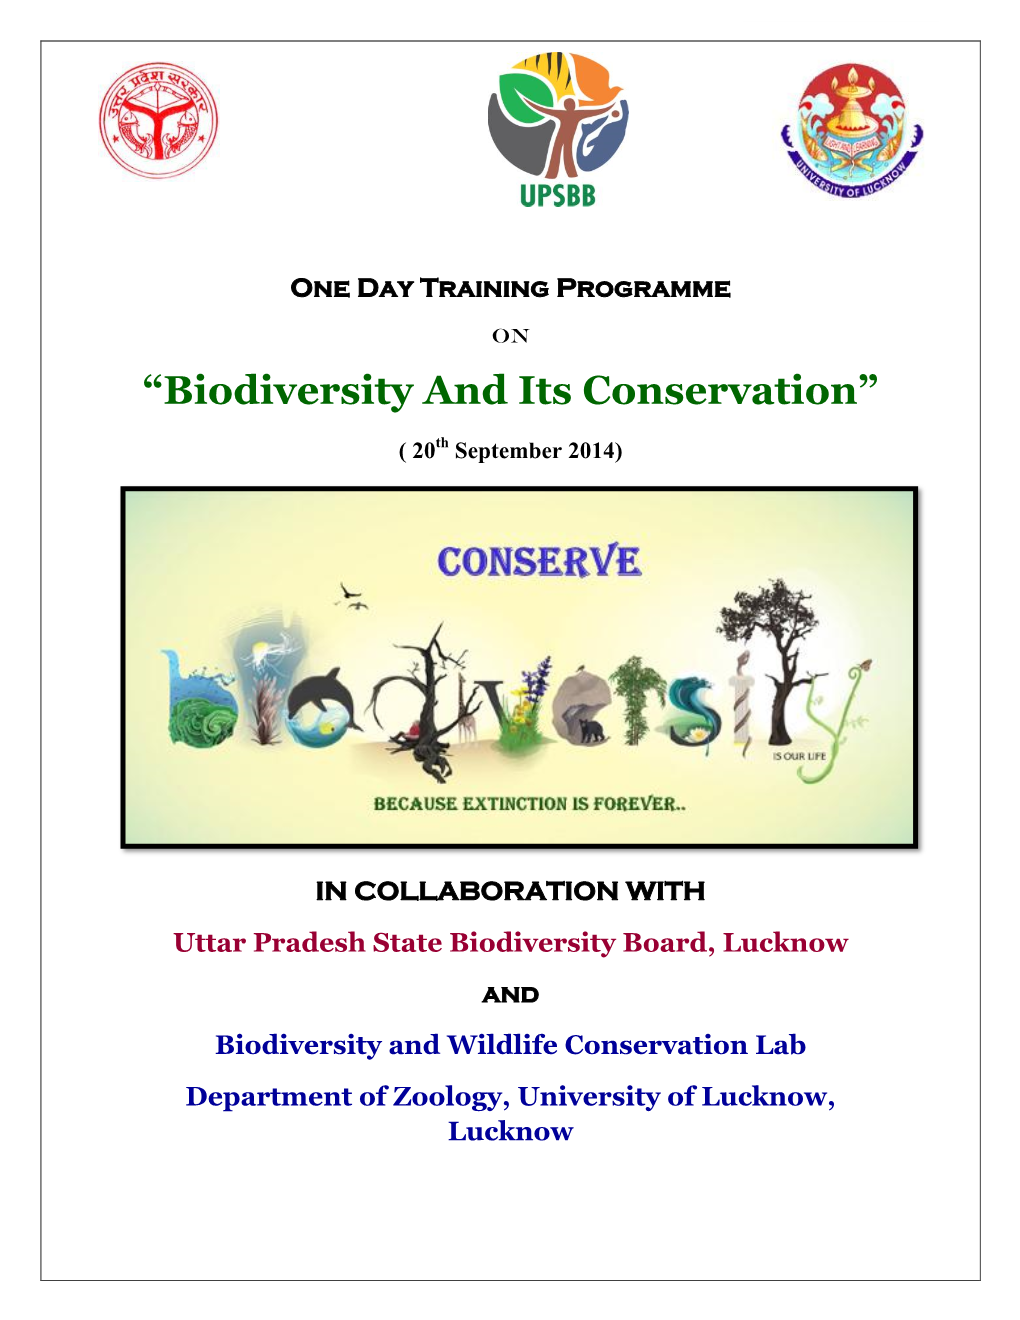 “Biodiversity and Its Conservation”